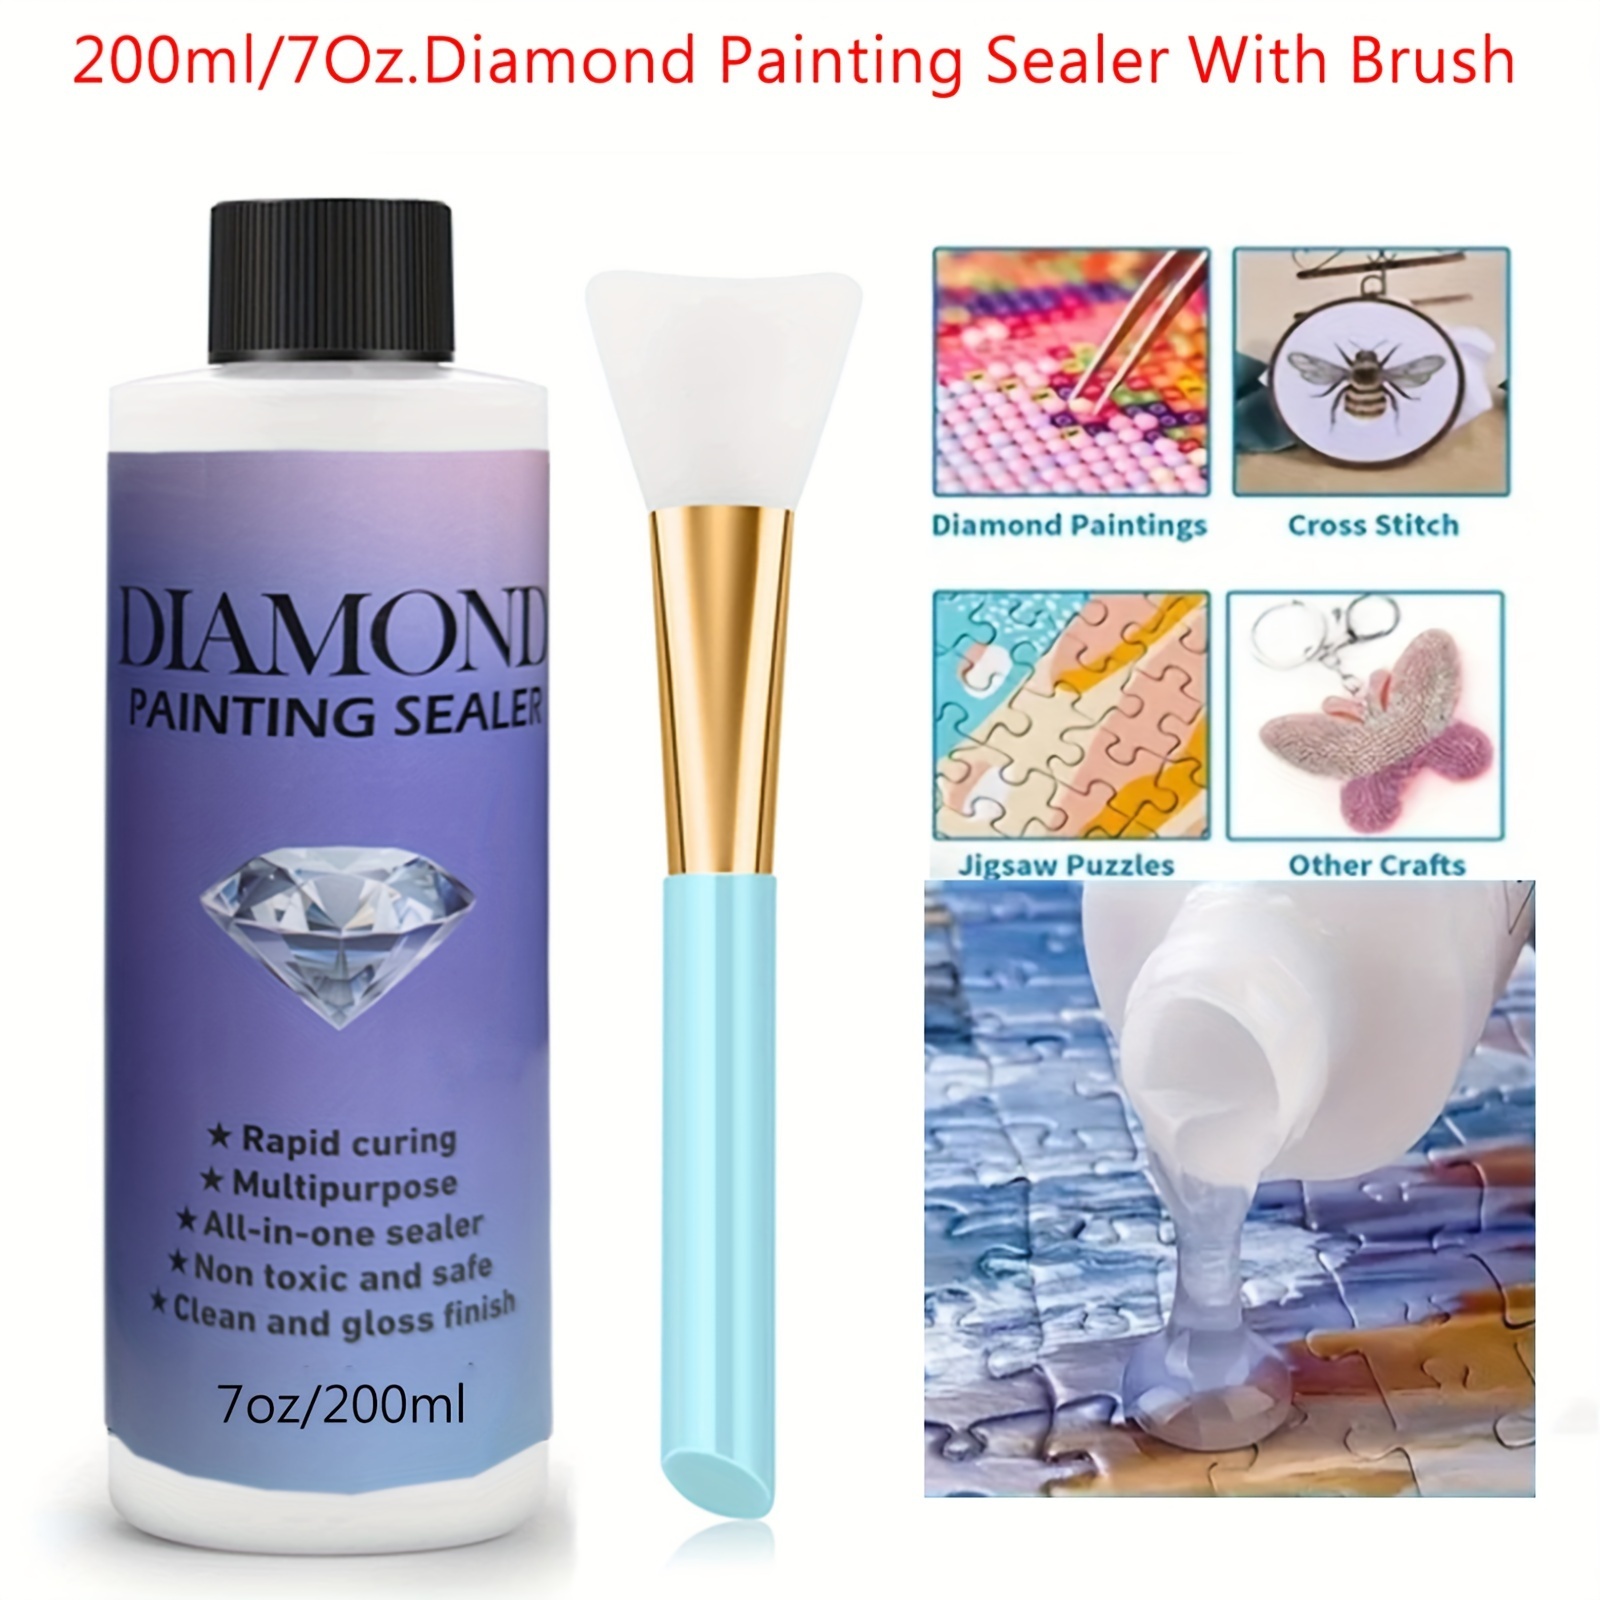  Diamond Painting Sealer 250 ML/8.45 OZ with Silicone Brush, 5D  Diamond Art Sealer Permanent Hold Shine Effect for Protect Diamond Painting  and Puzzle, Non-Toxic Glue Used by Adult and Children Safely